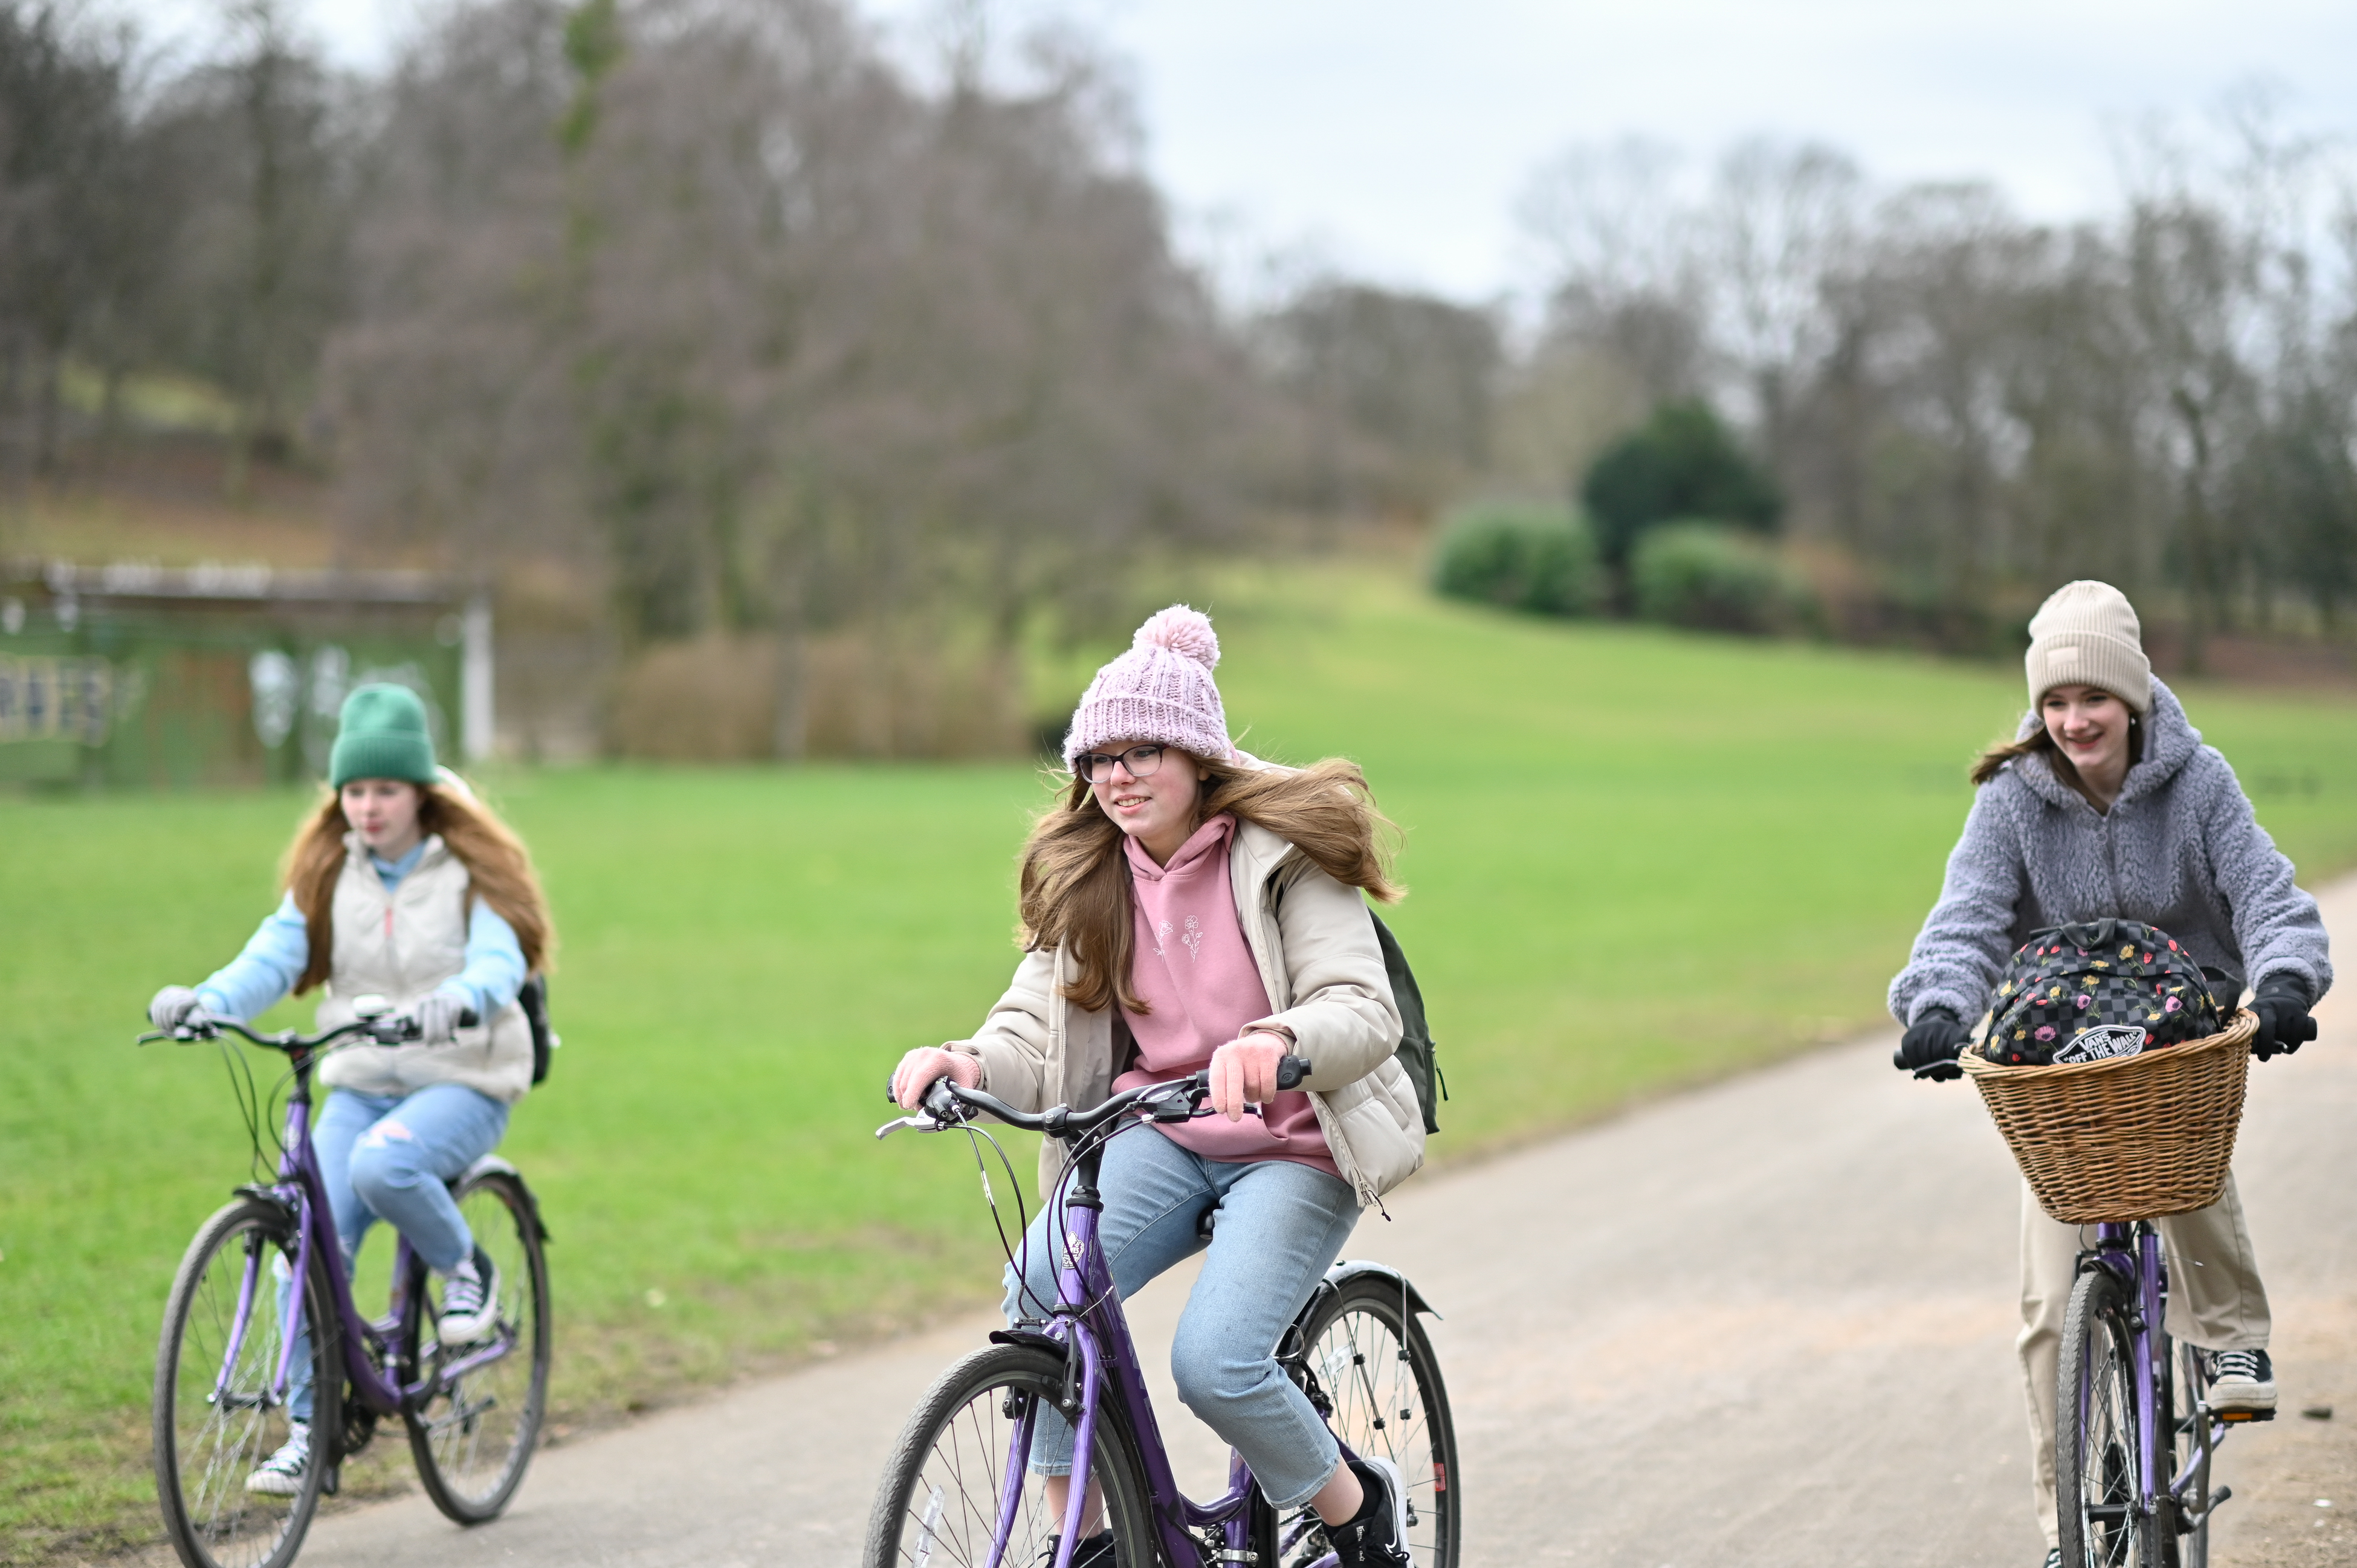 Three young girls cycling socially in the park